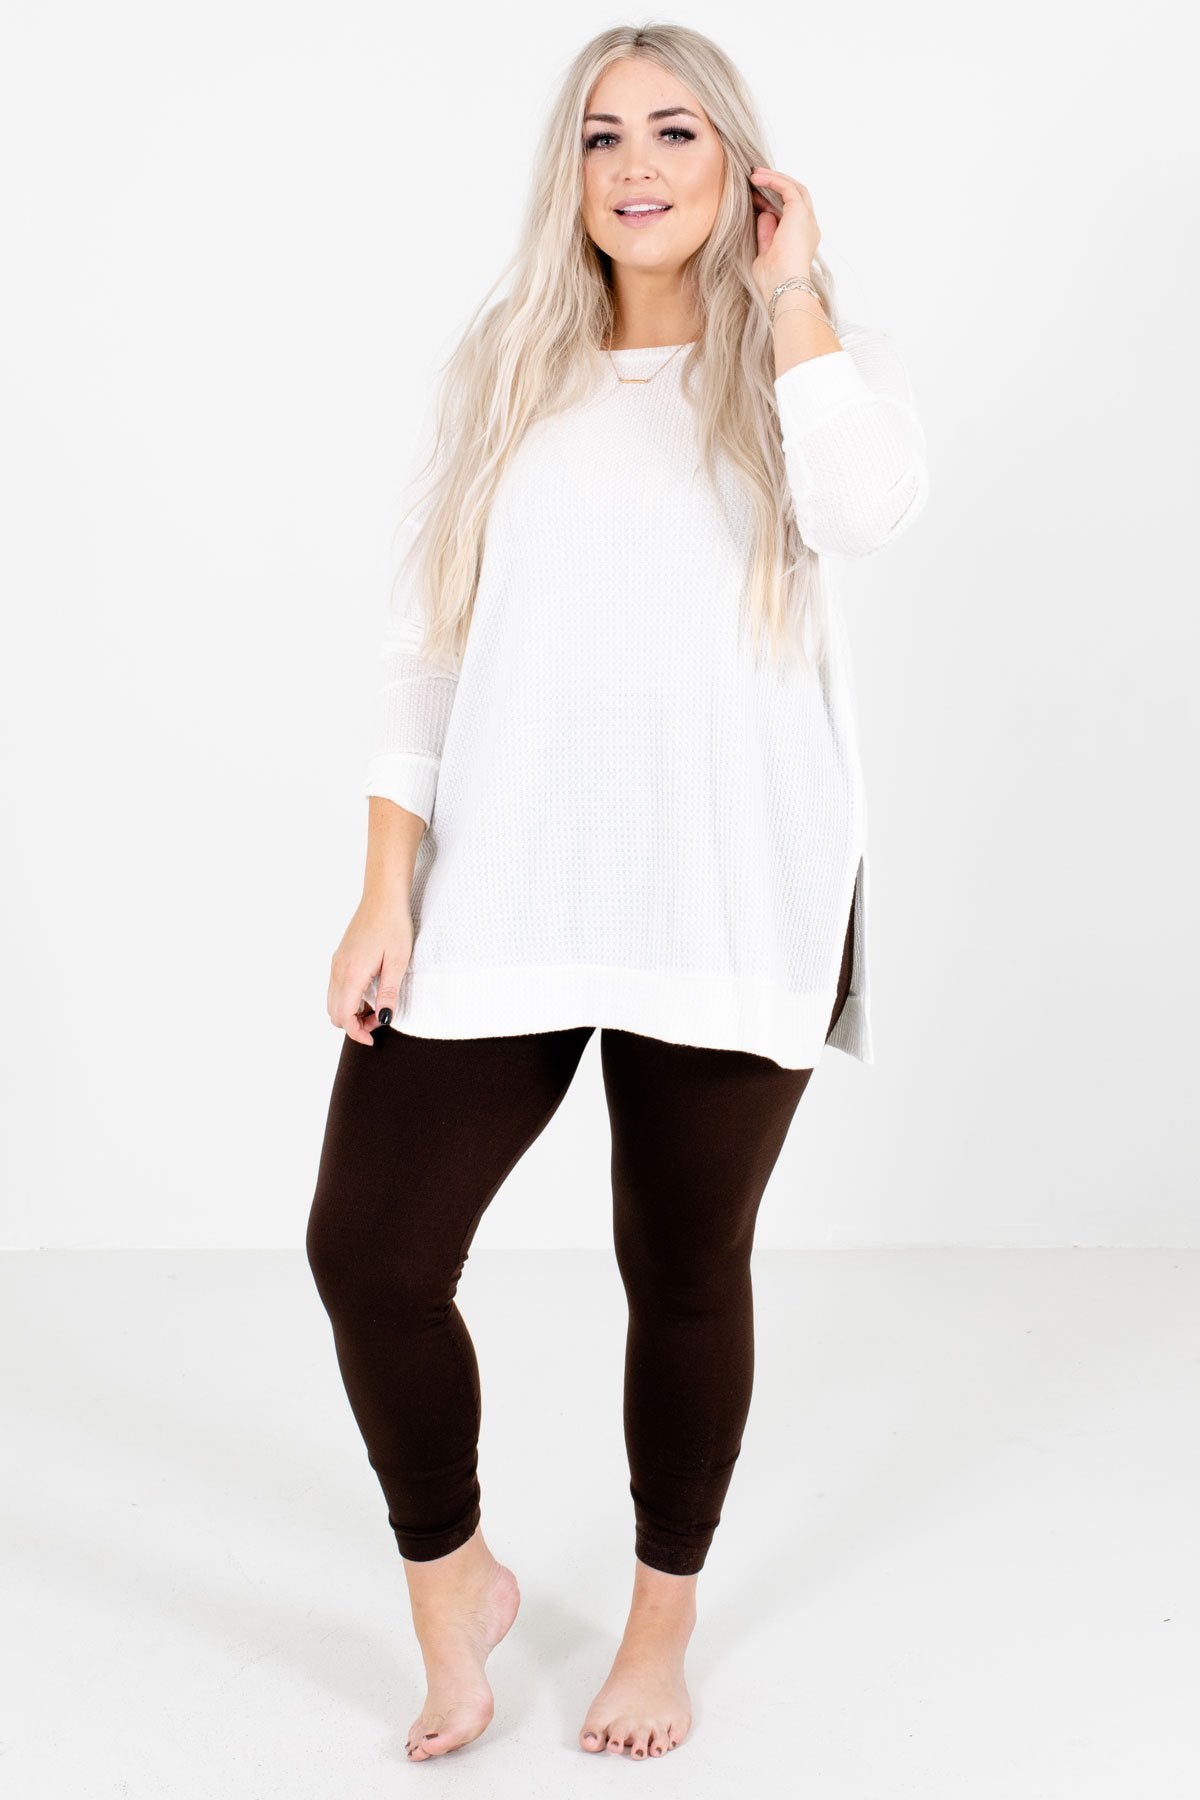 Thick Thighed Women, women's Fleece-lined Tights